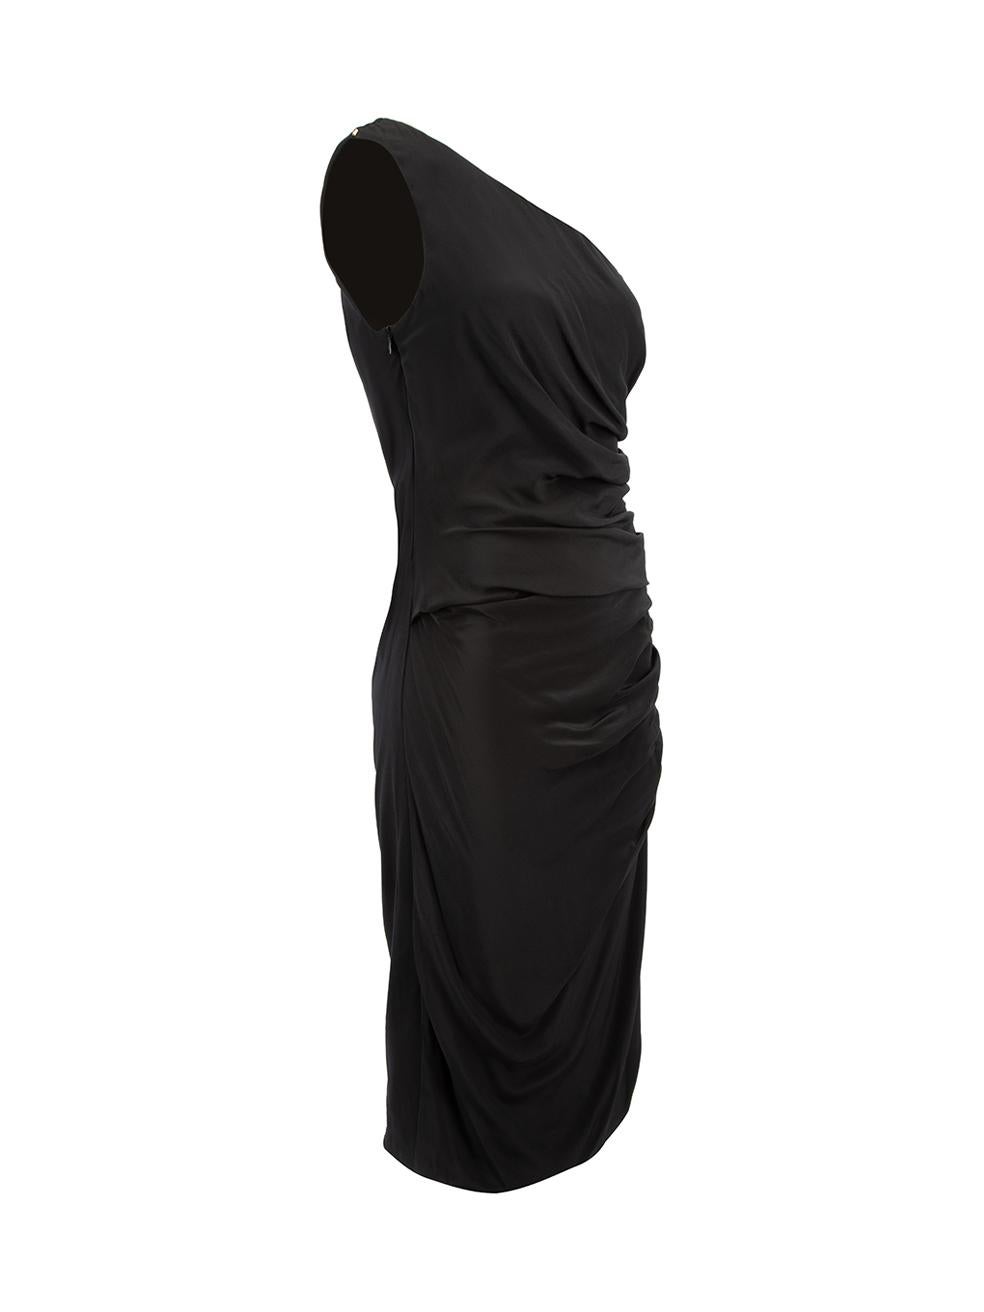 CONDITION is Very good. Minimal wear to dress is evident. Unstitching can be seen on the lining to hemline on this used Sportmax designer resale item. 



Details


Black

Viscose

One-shoulder body-con dress

Midi length

Pleated ruffle